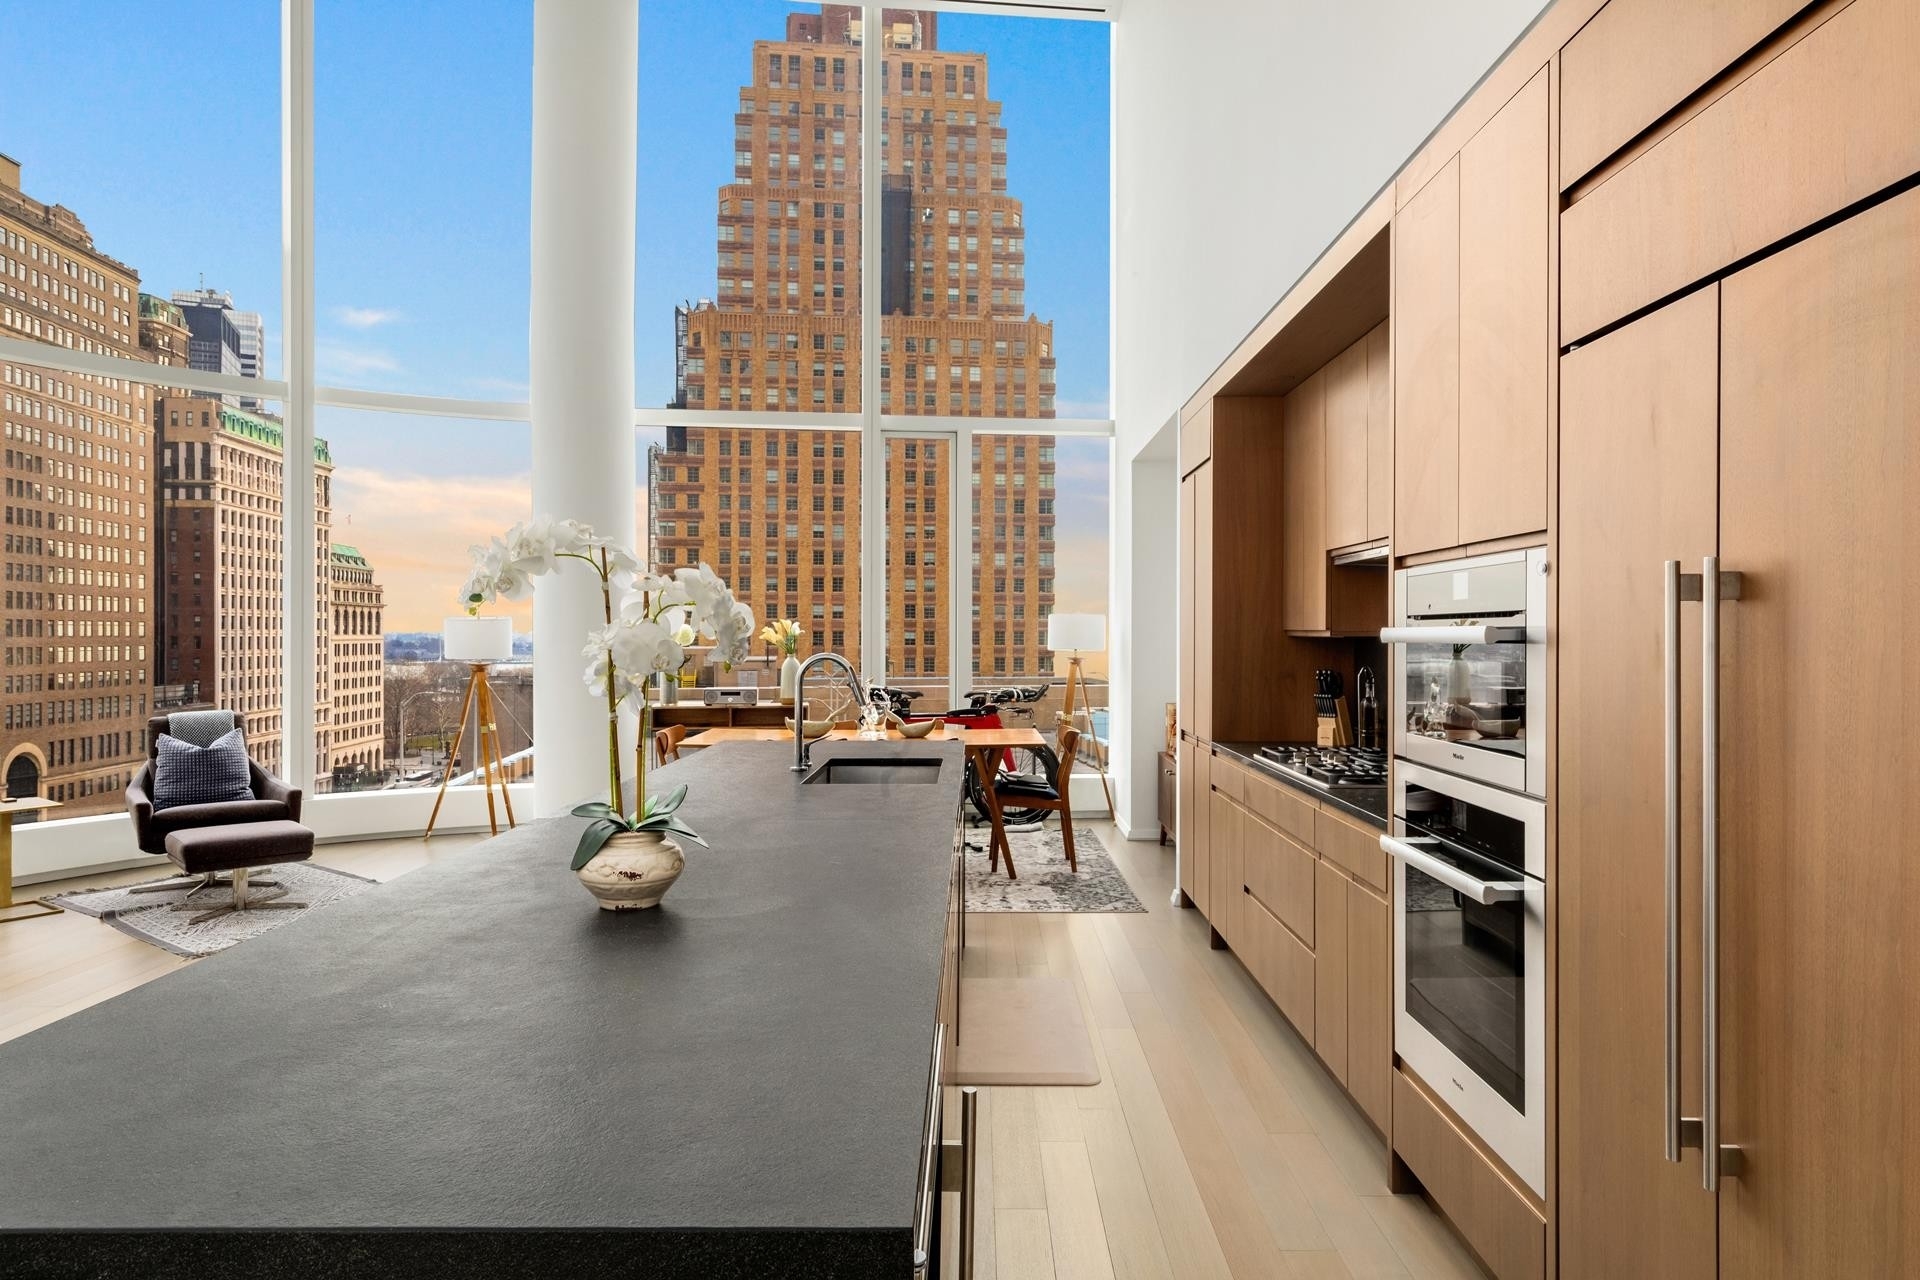 Property at 50 WEST ST, 9B New York